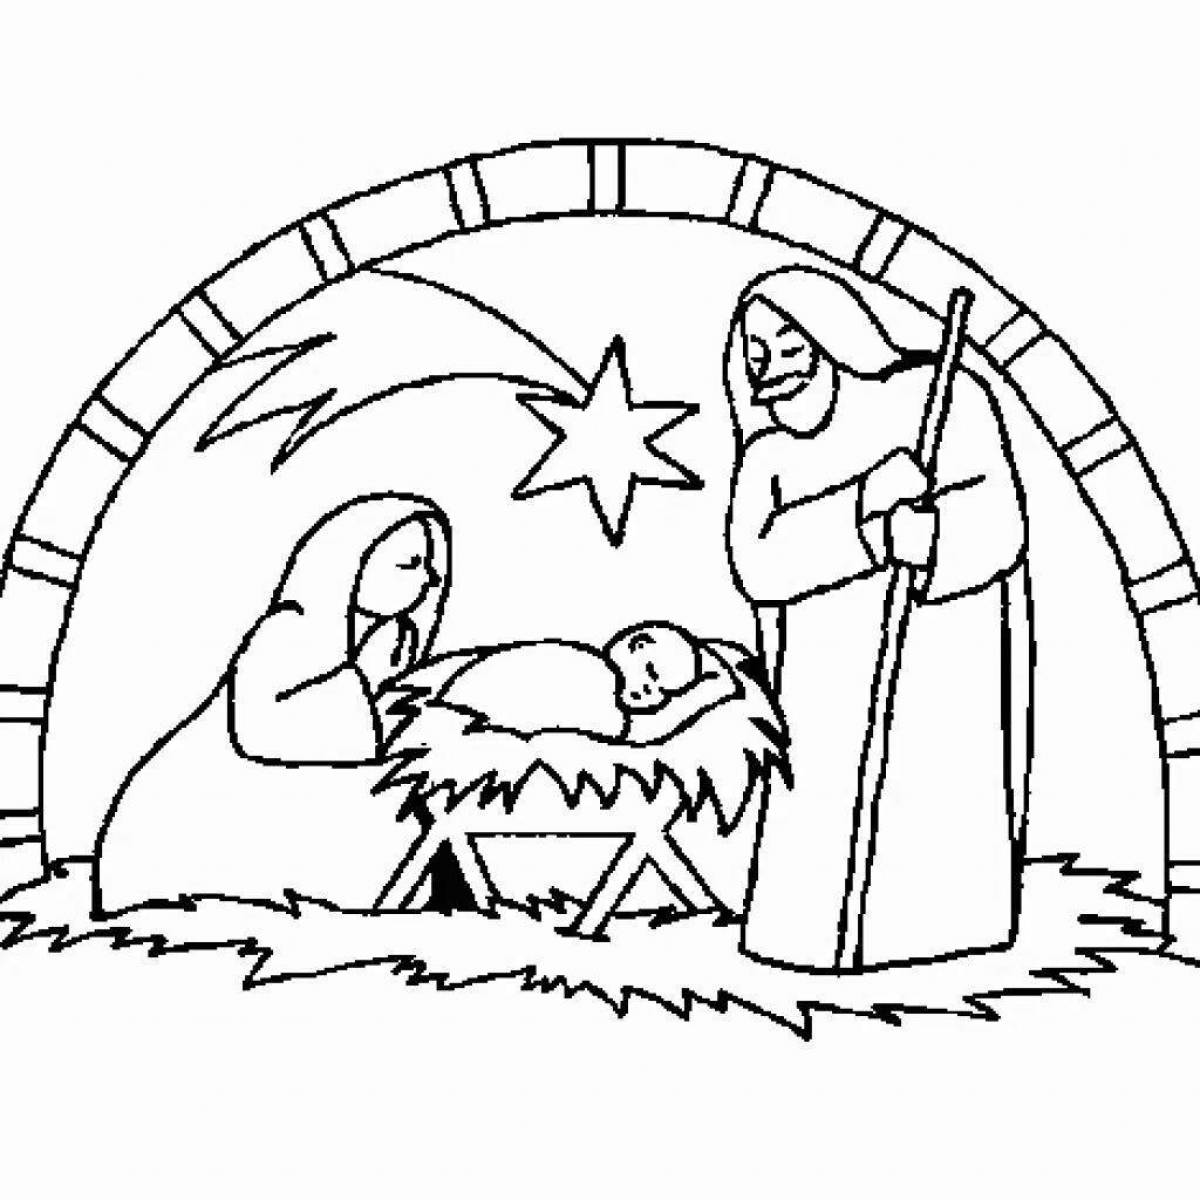 Illustrative coloring page of the birth of jesus christ